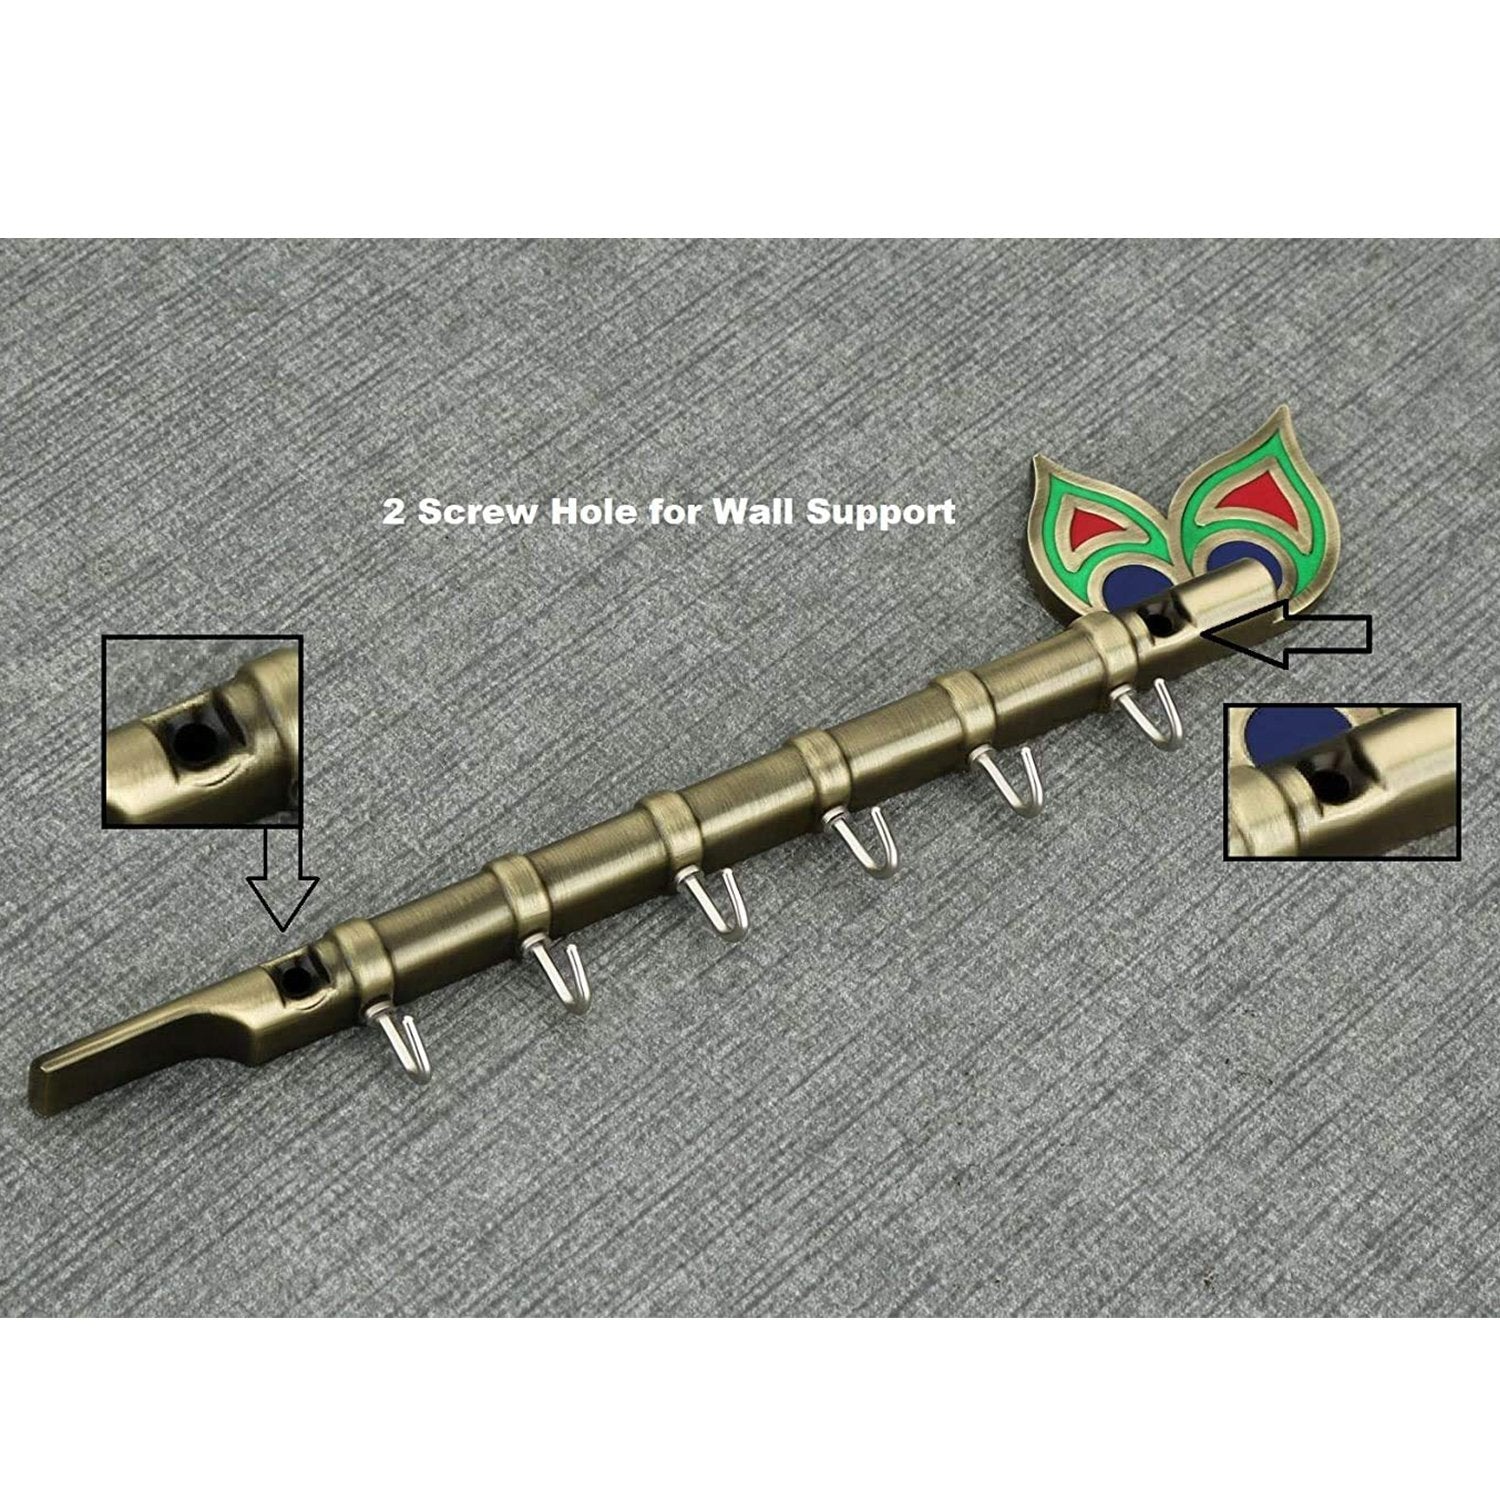 0497 Brass Flute and Peacock Key Holder Wall Hanging - SkyShopy